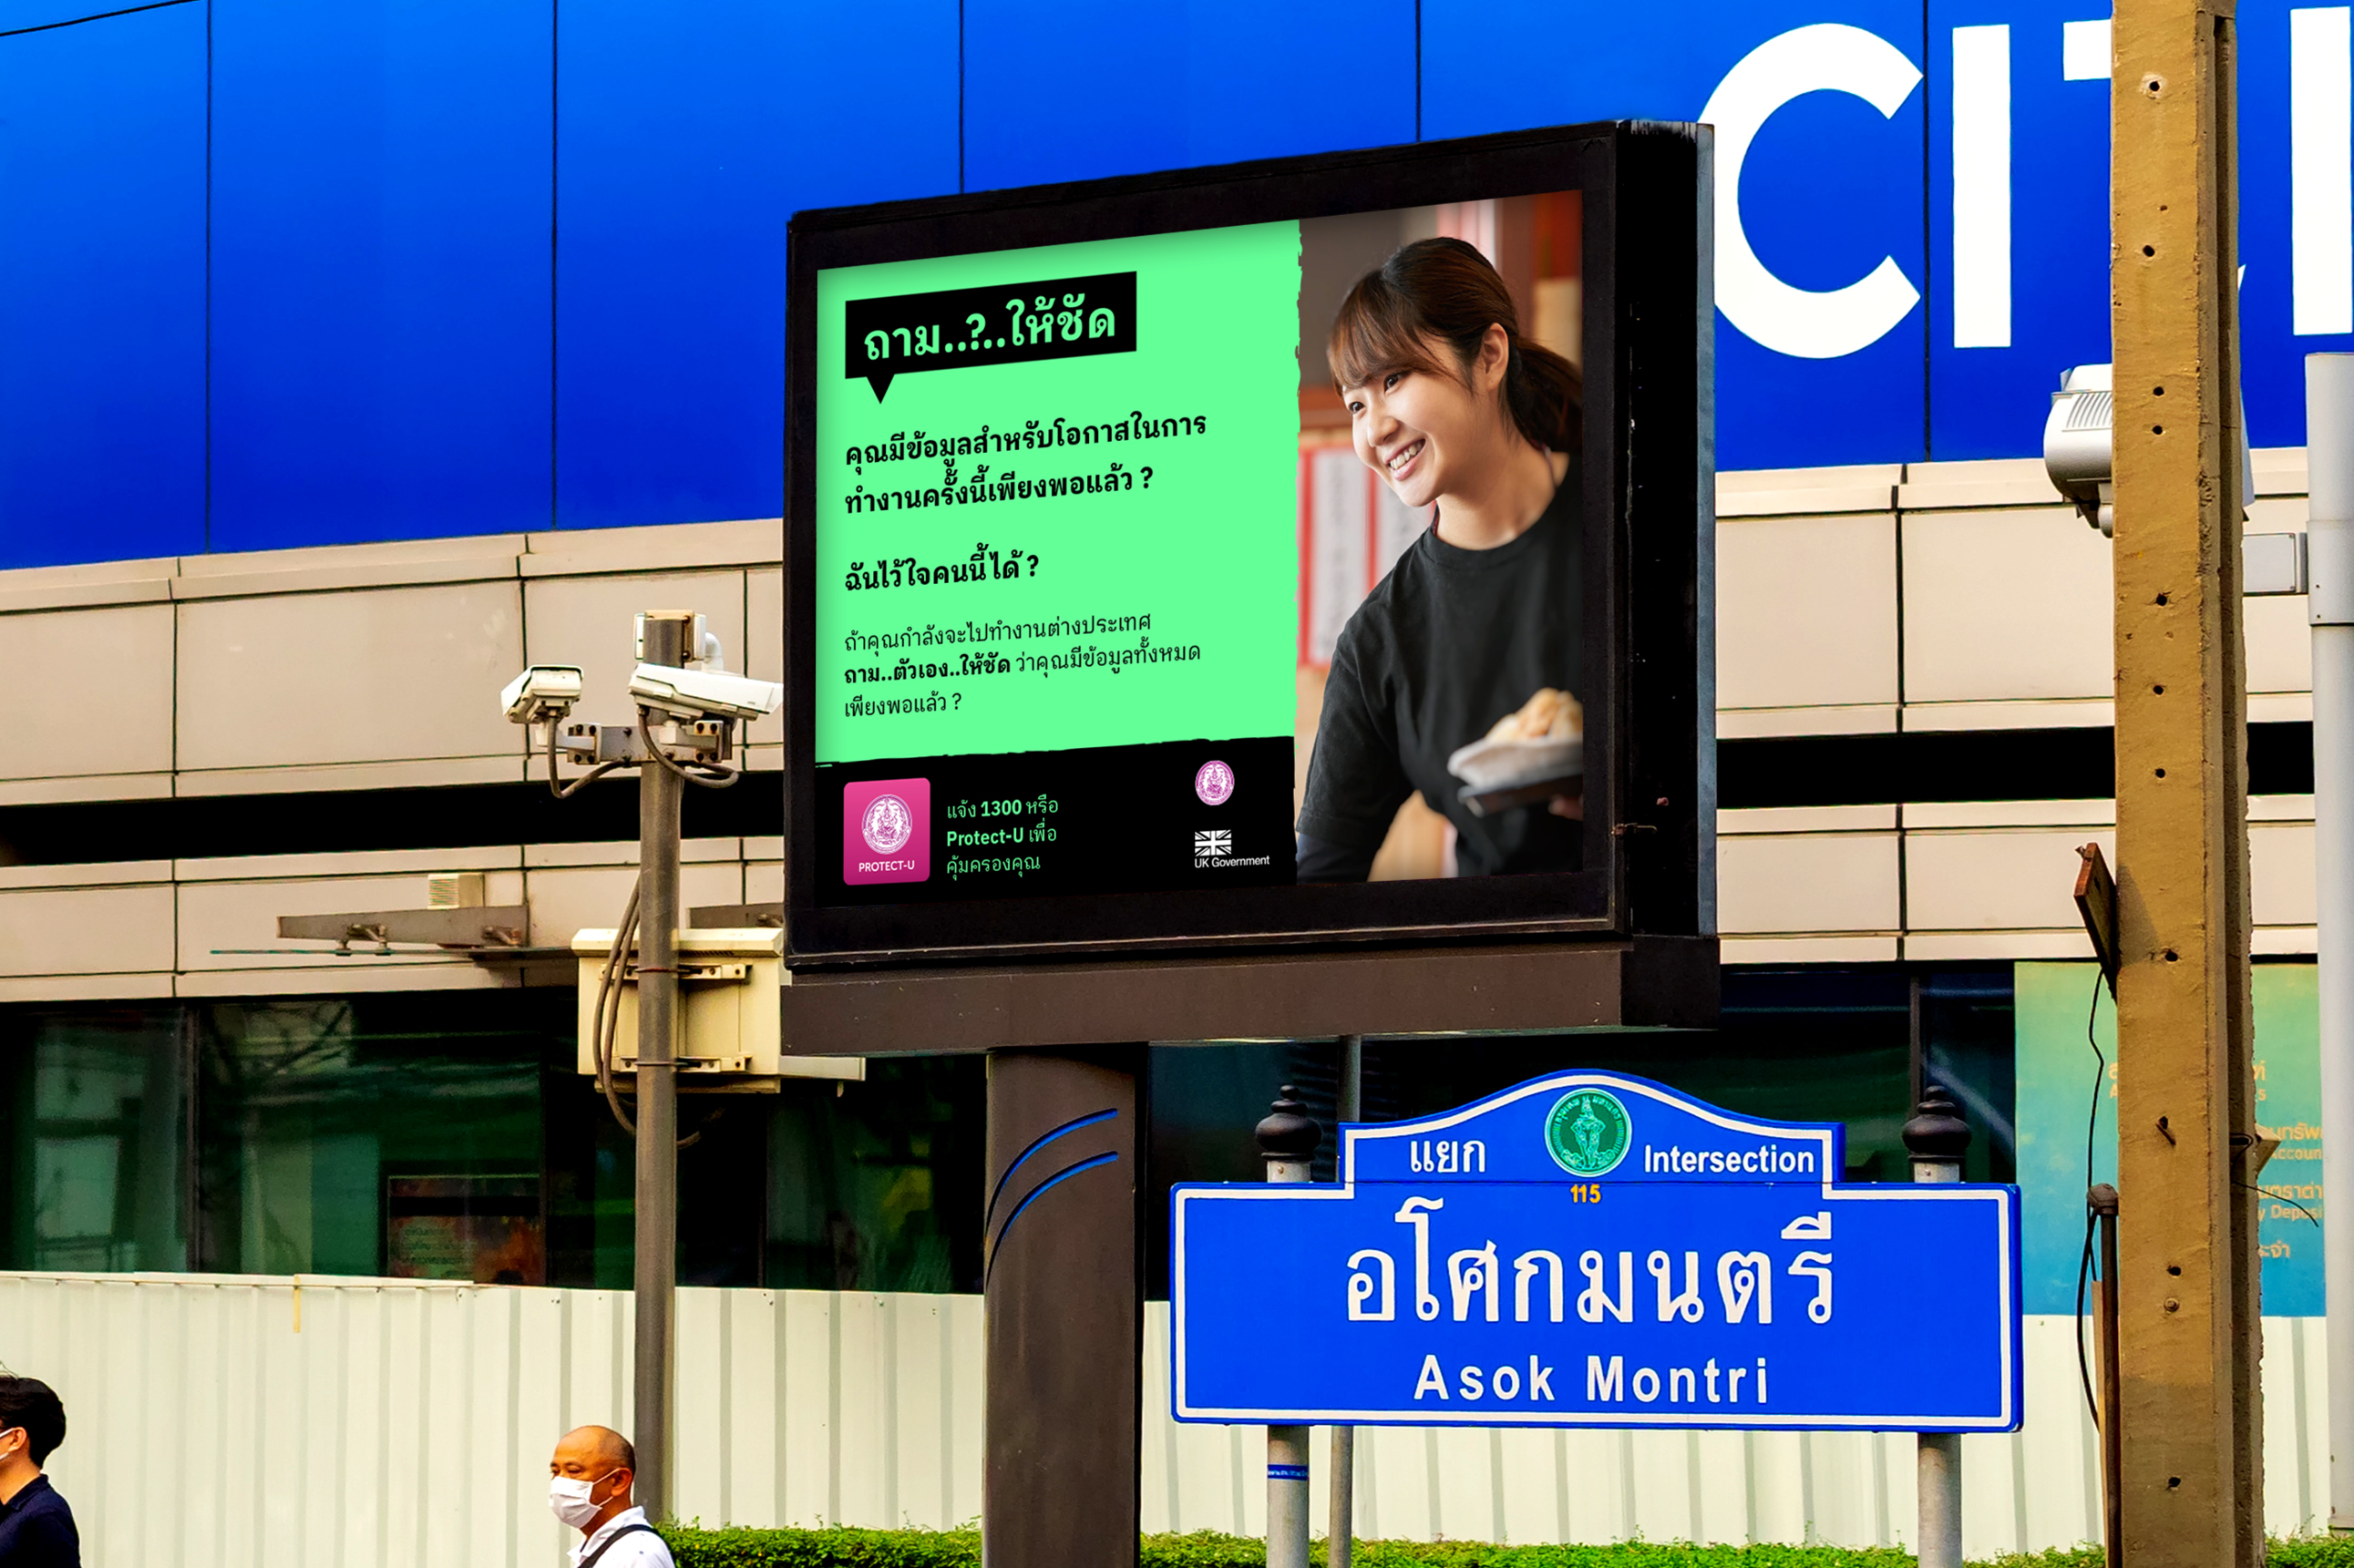 A billboard in an urban area in Thailand showing an image from the Always Ask campaign.